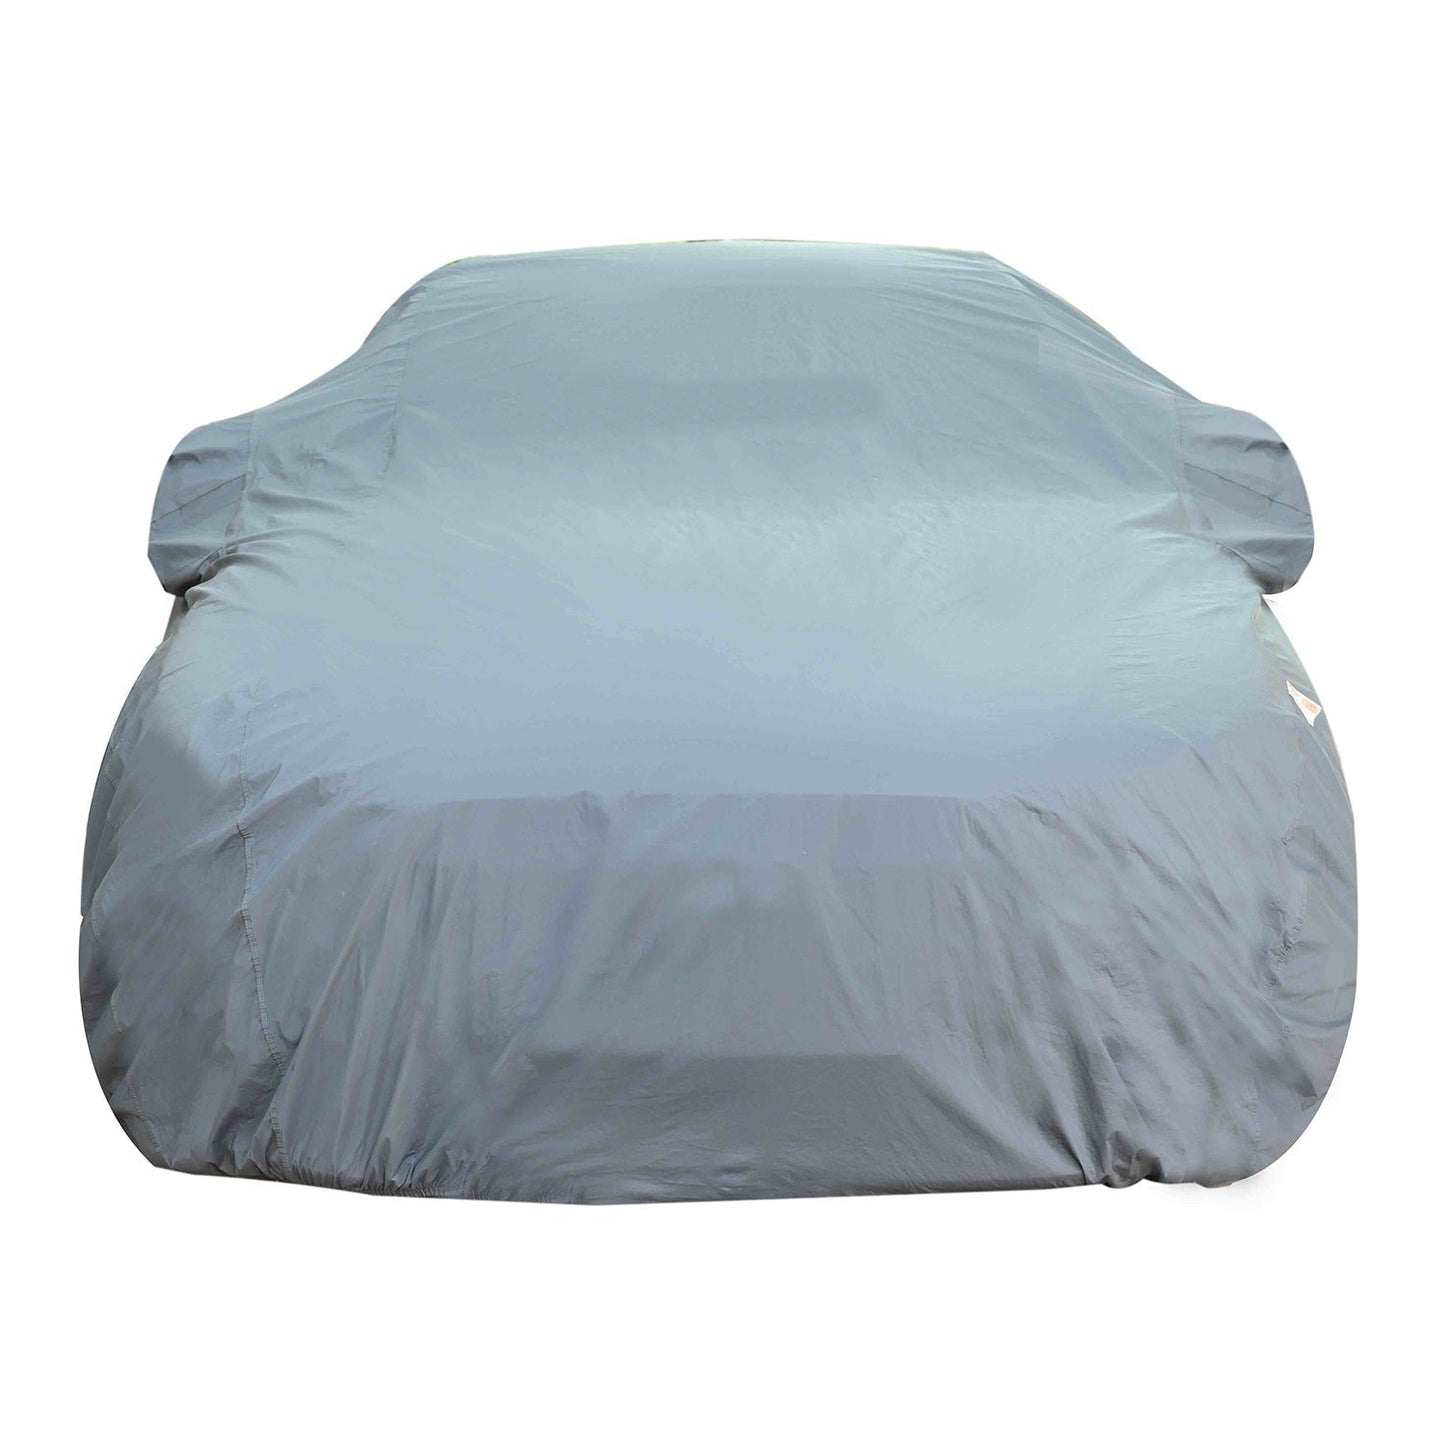 Oshotto Dark Grey 100% Anti Reflective, dustproof and Water Proof Car Body Cover with Mirror Pockets For Tata Altroz